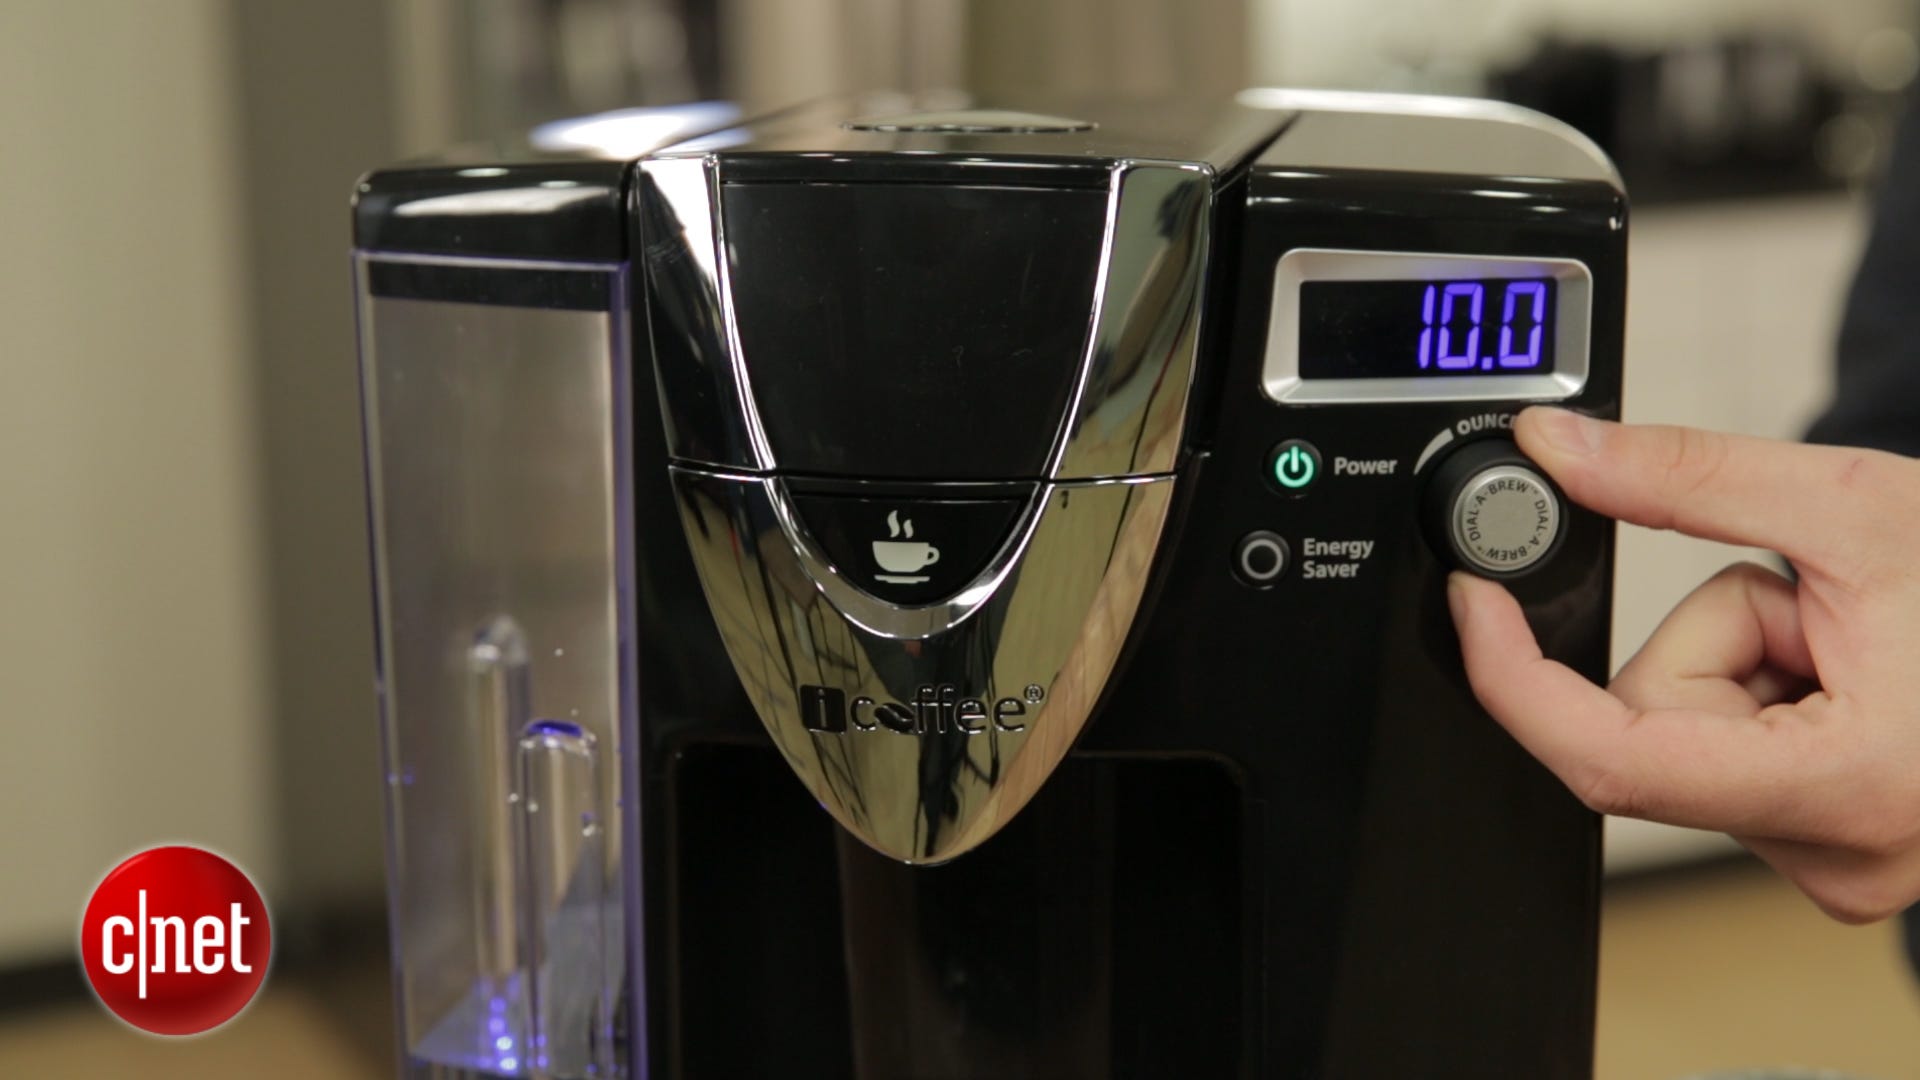 Breville Precision Brewer review: Drips coffee exactly your way - CNET